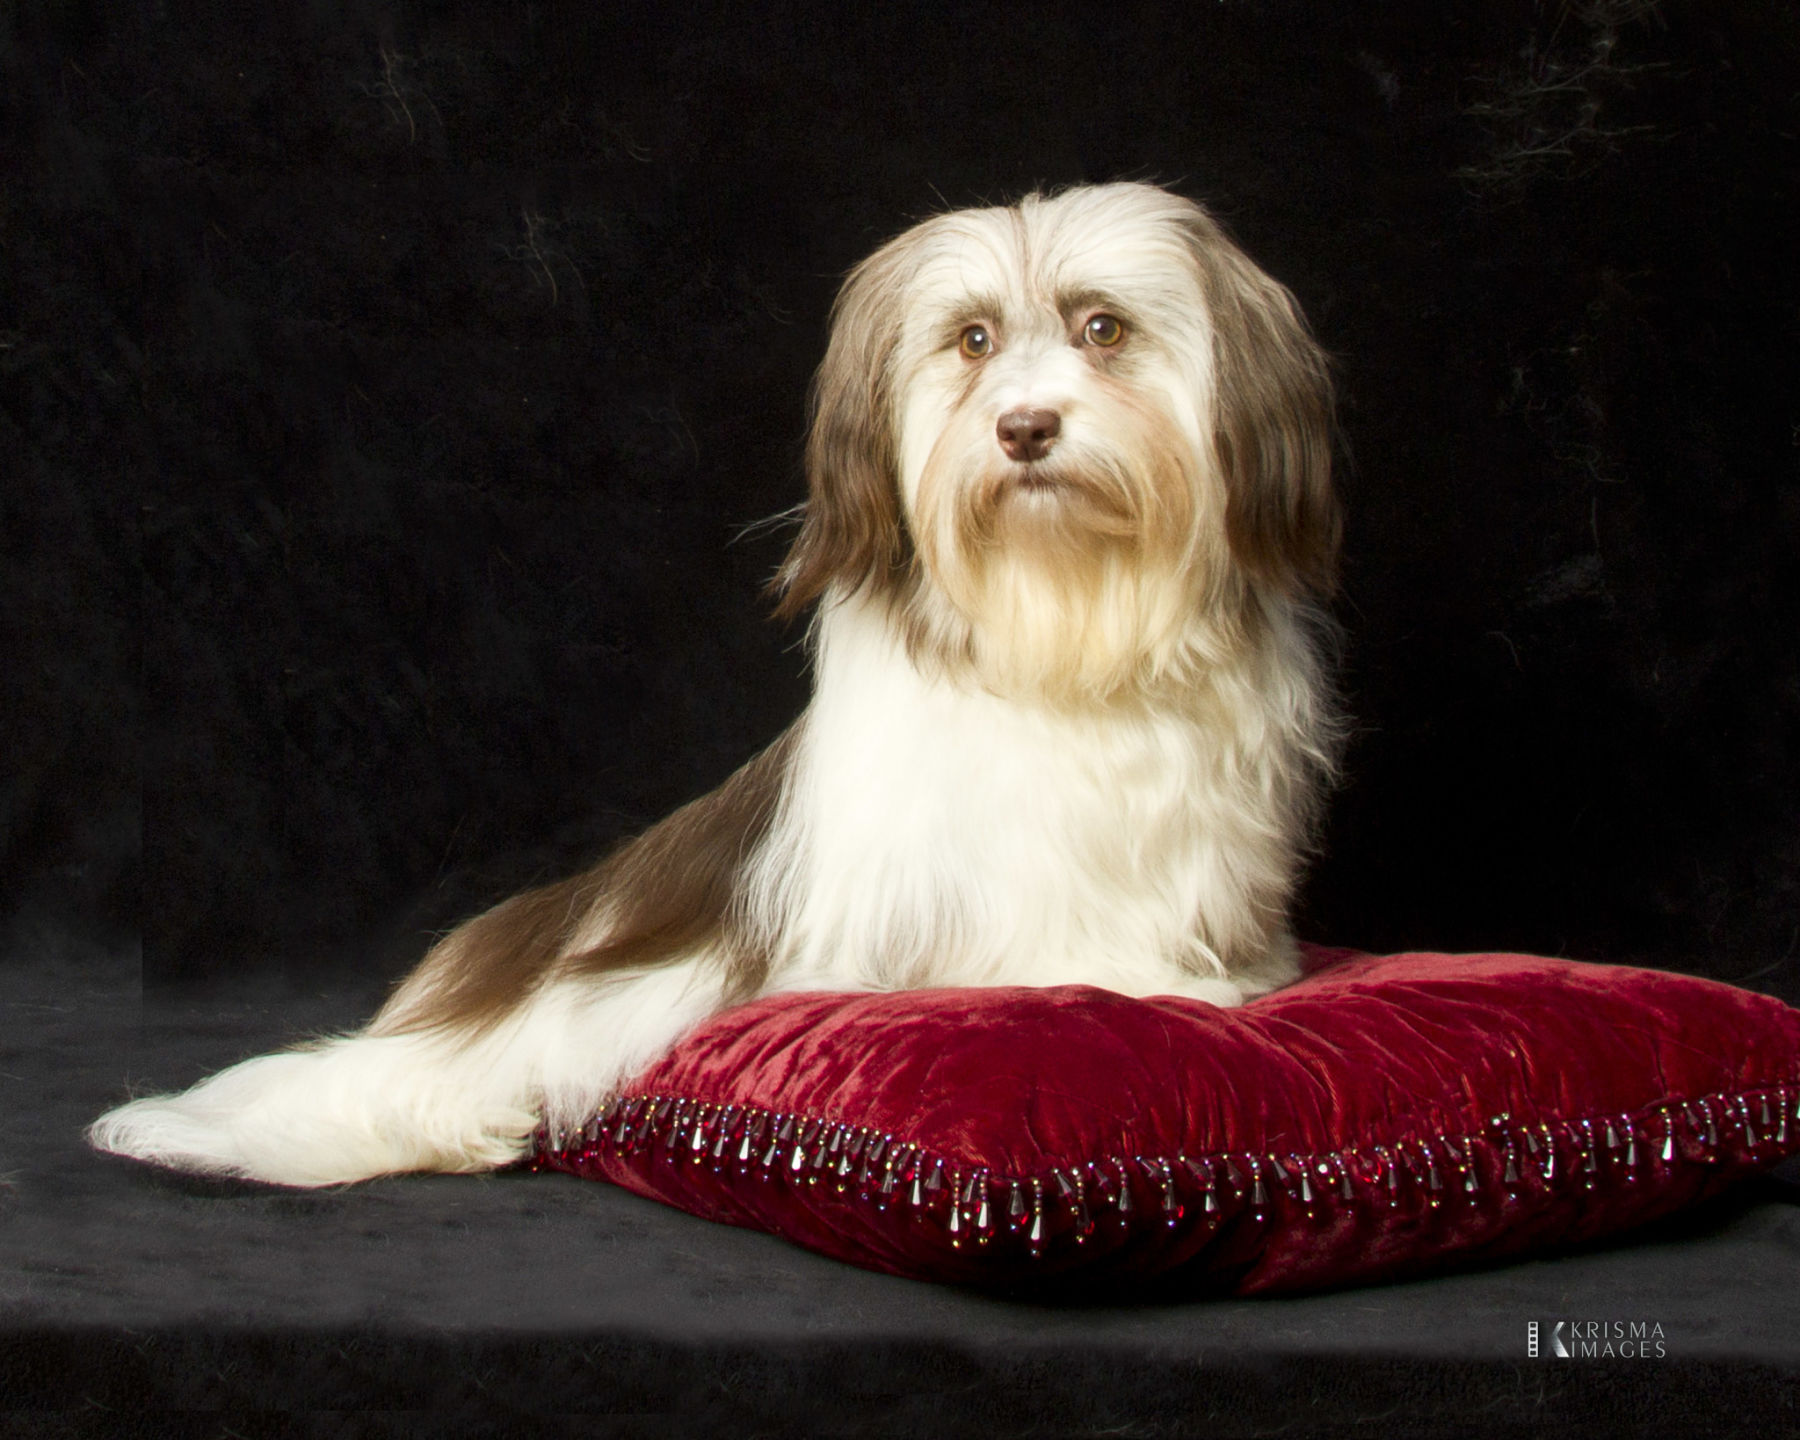 Happy Paws Havanese Fudge as a finished Champion